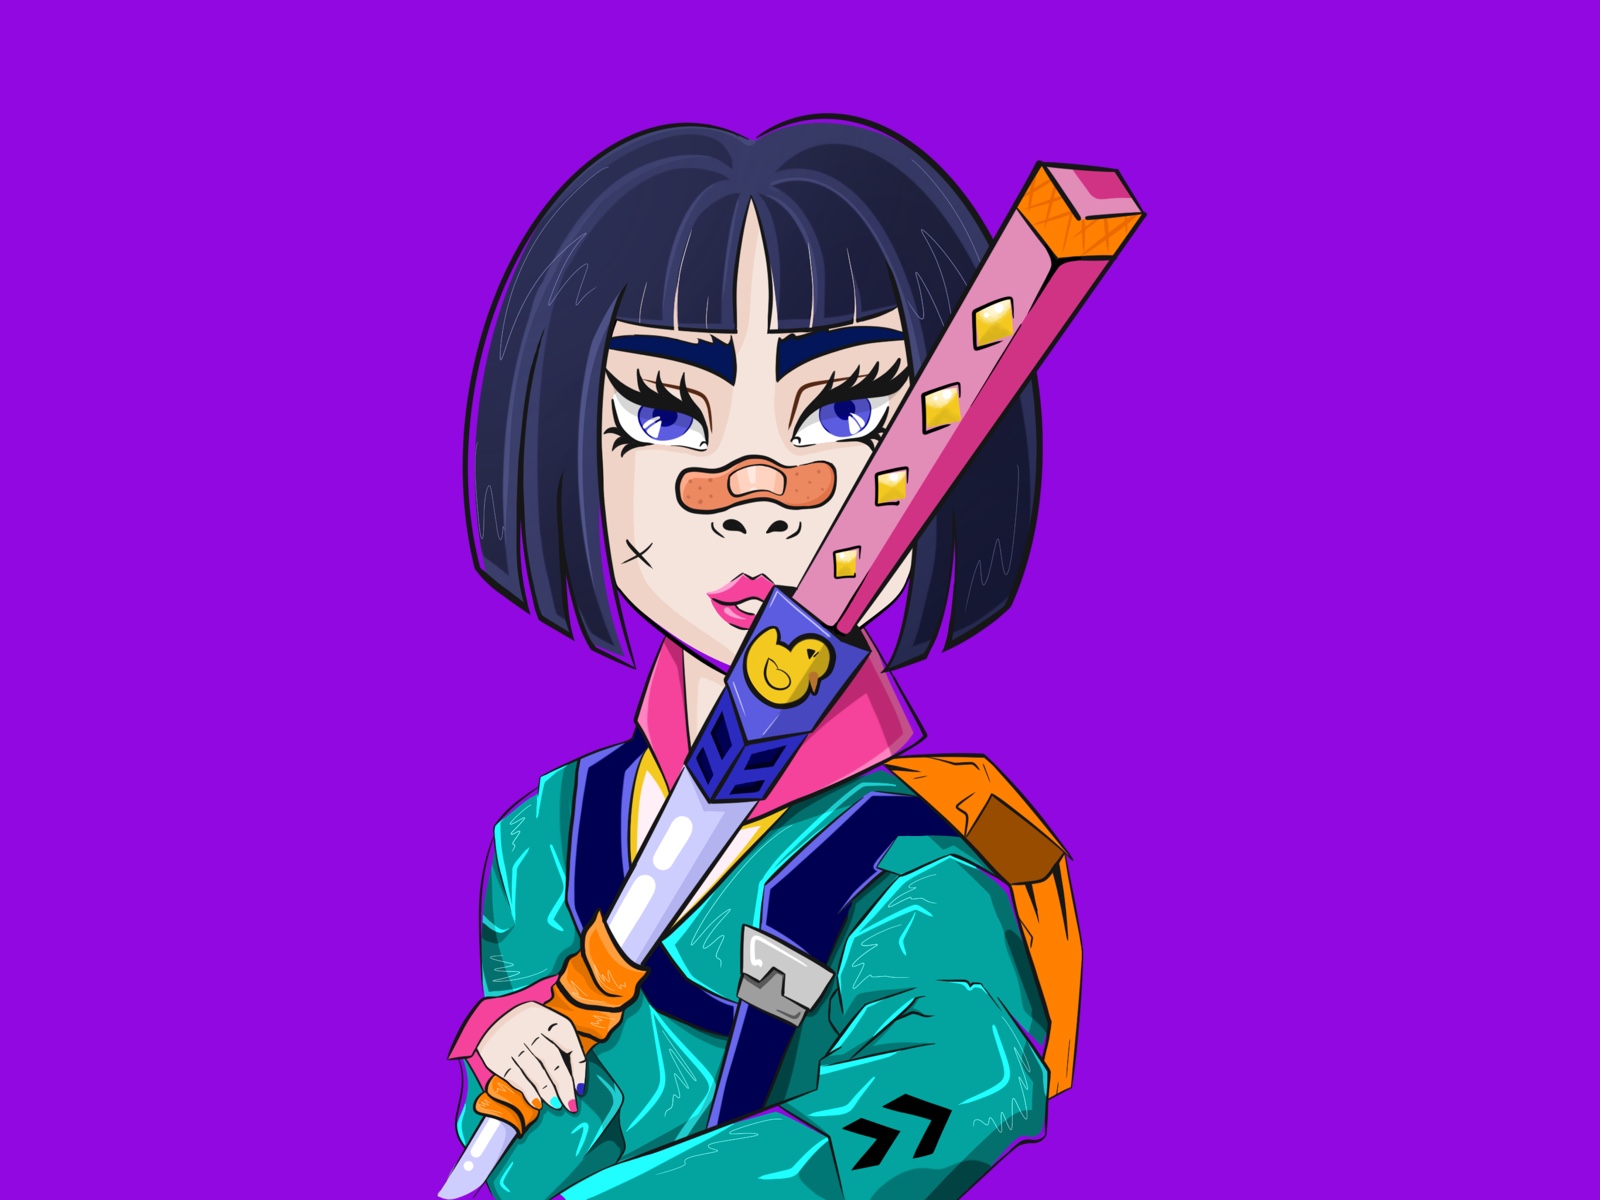 Create cyberpunk anime style illustration for you by Riszaperdhana | Fiverr